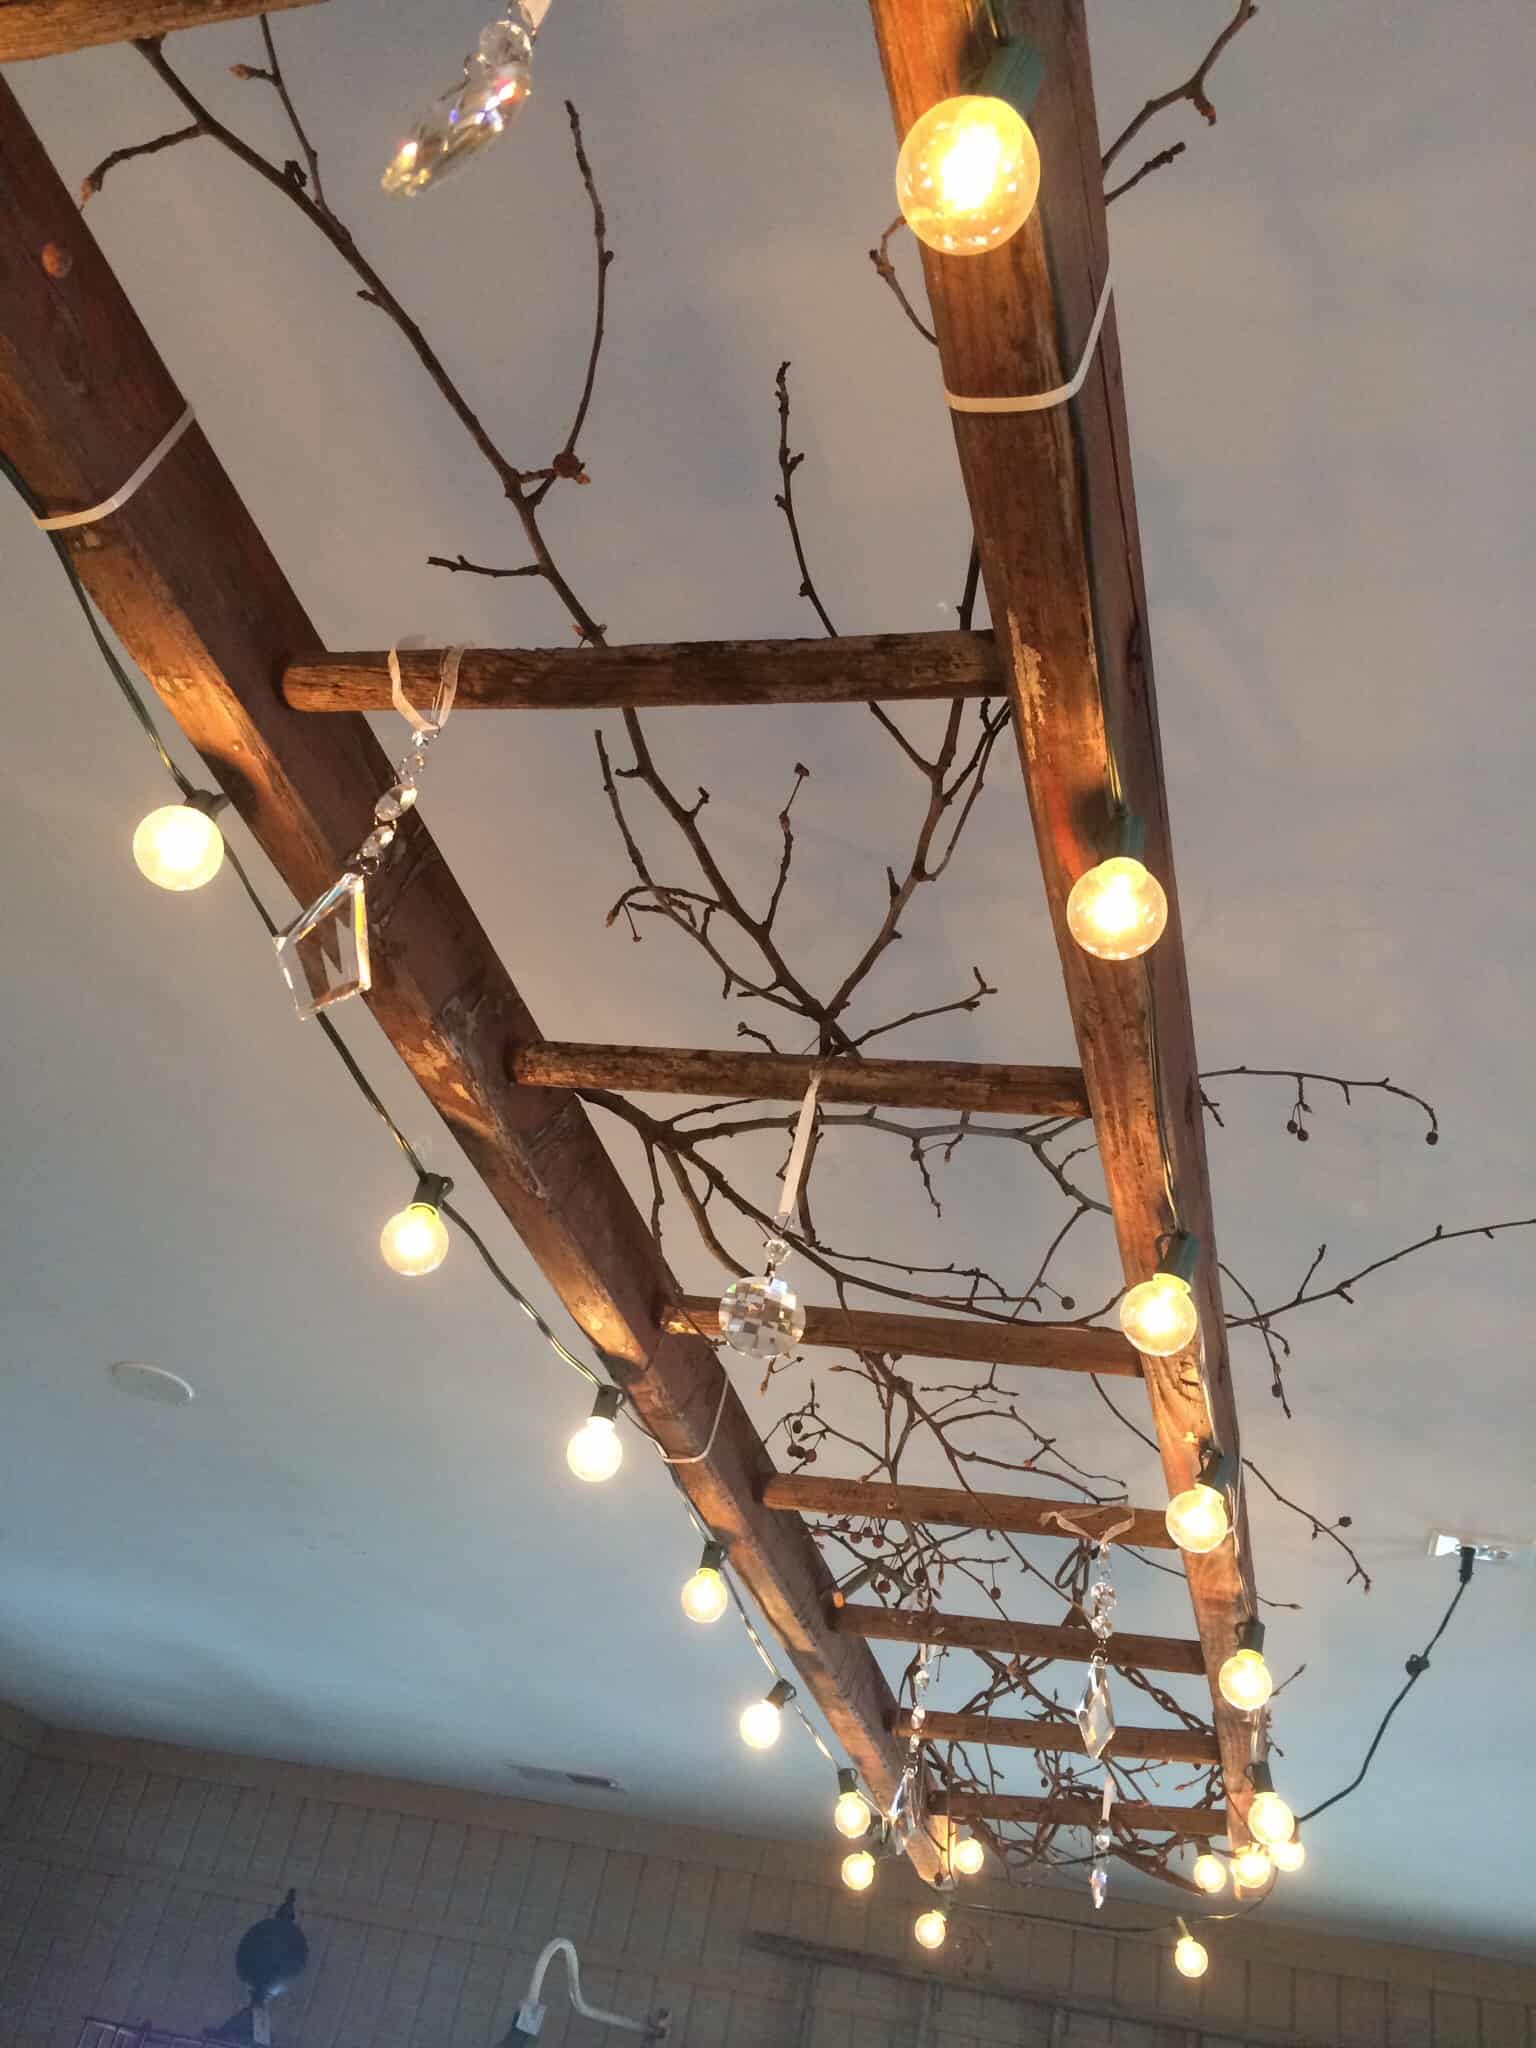 Take a ladder and create your very own rustic chandelier